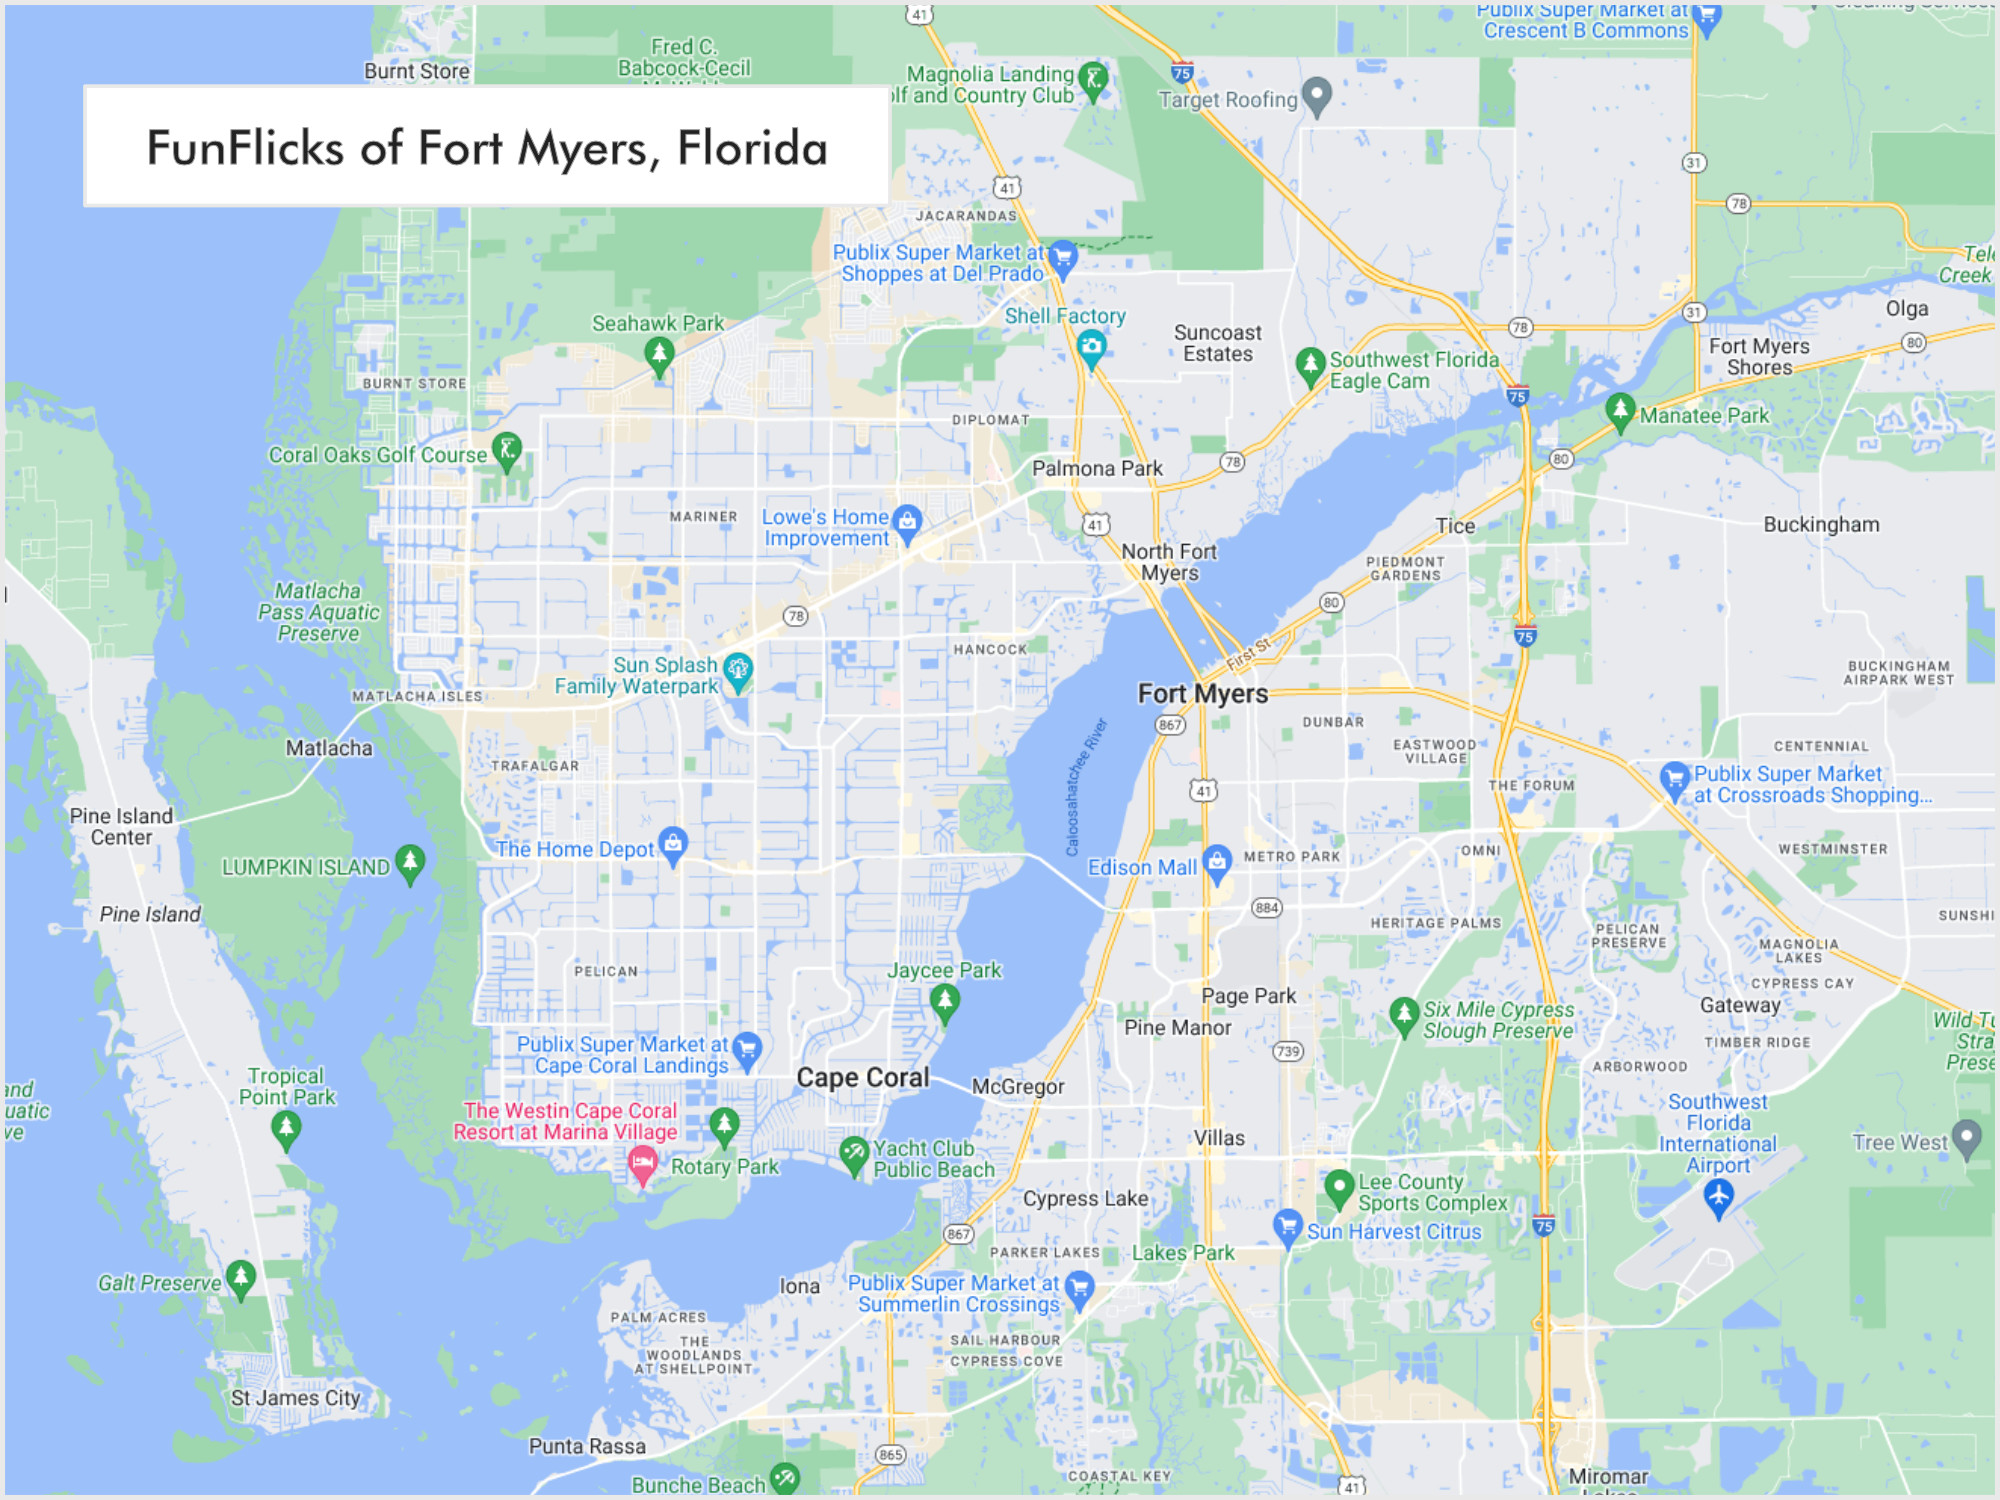 FunFlicks® Fort Myers territory map